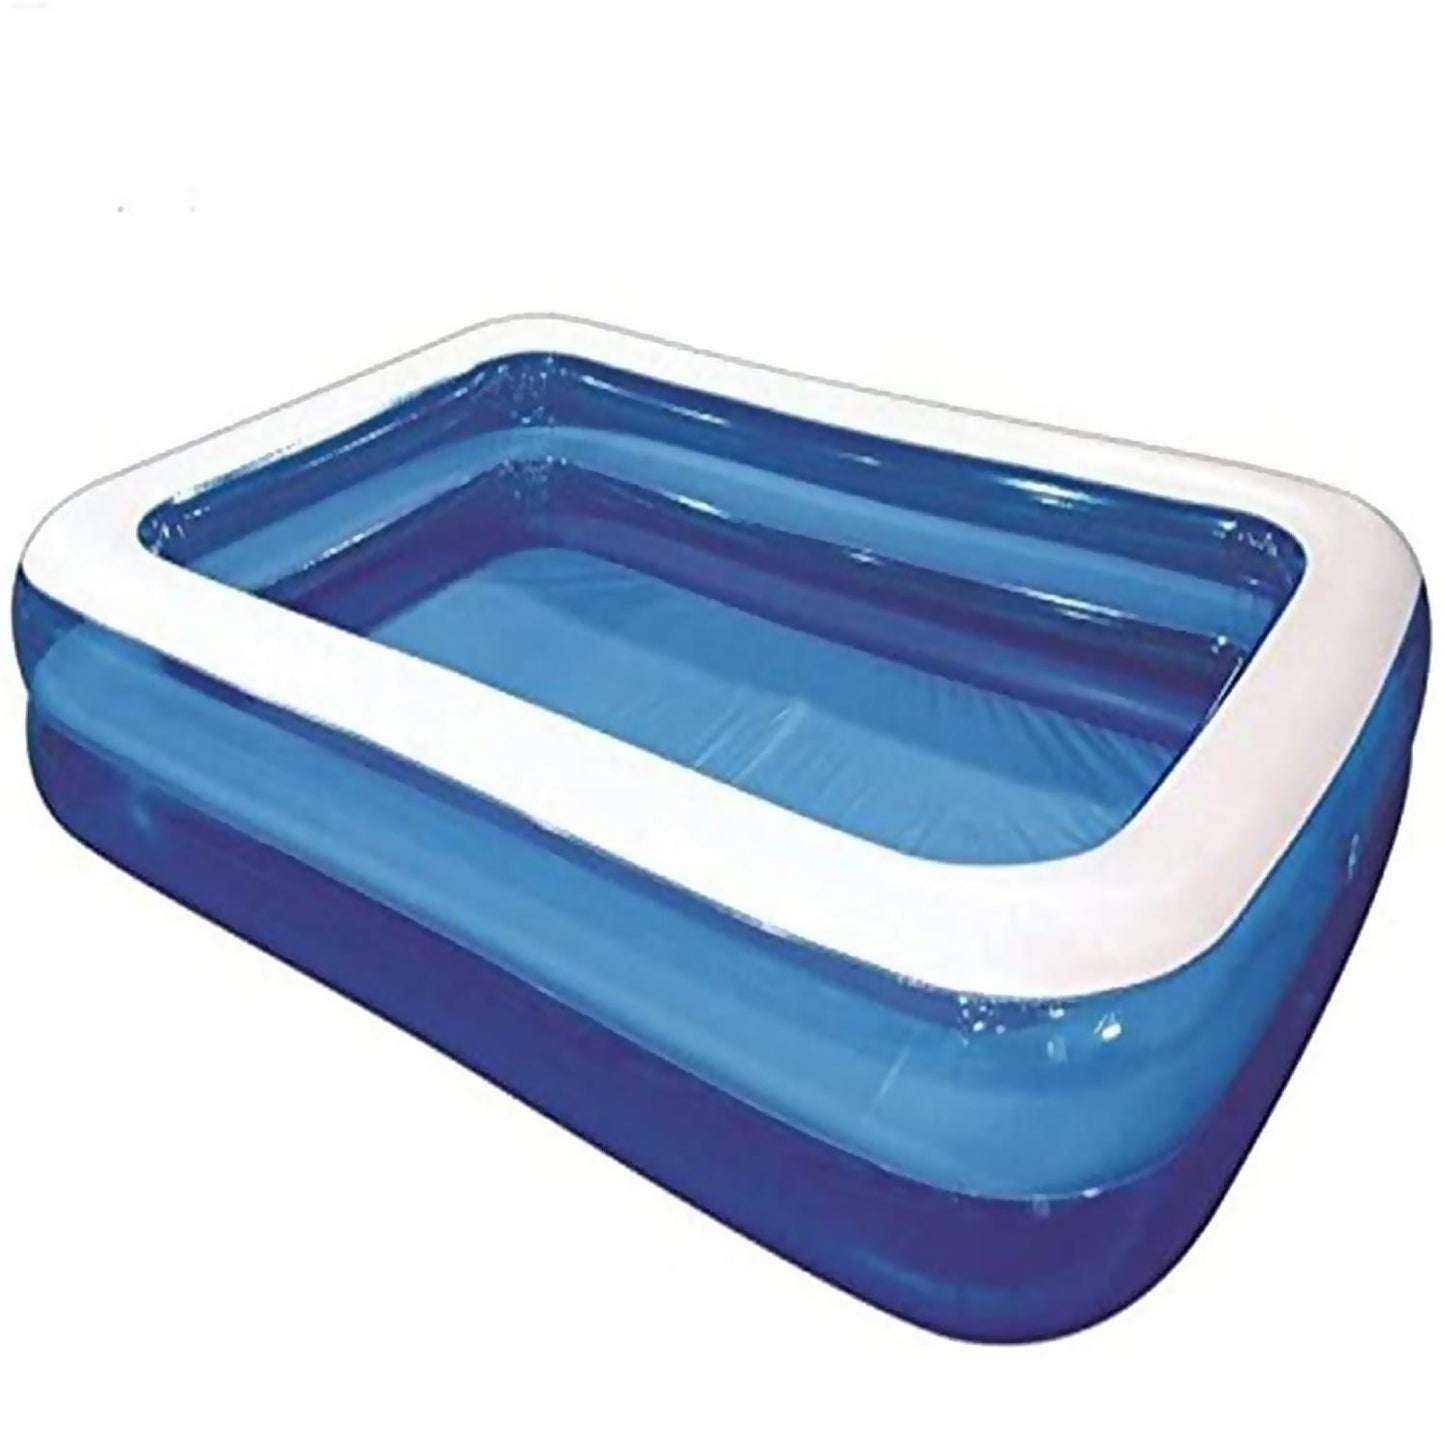 Enormous 2M x 1.5M Inflatable Swimming Pool for Family